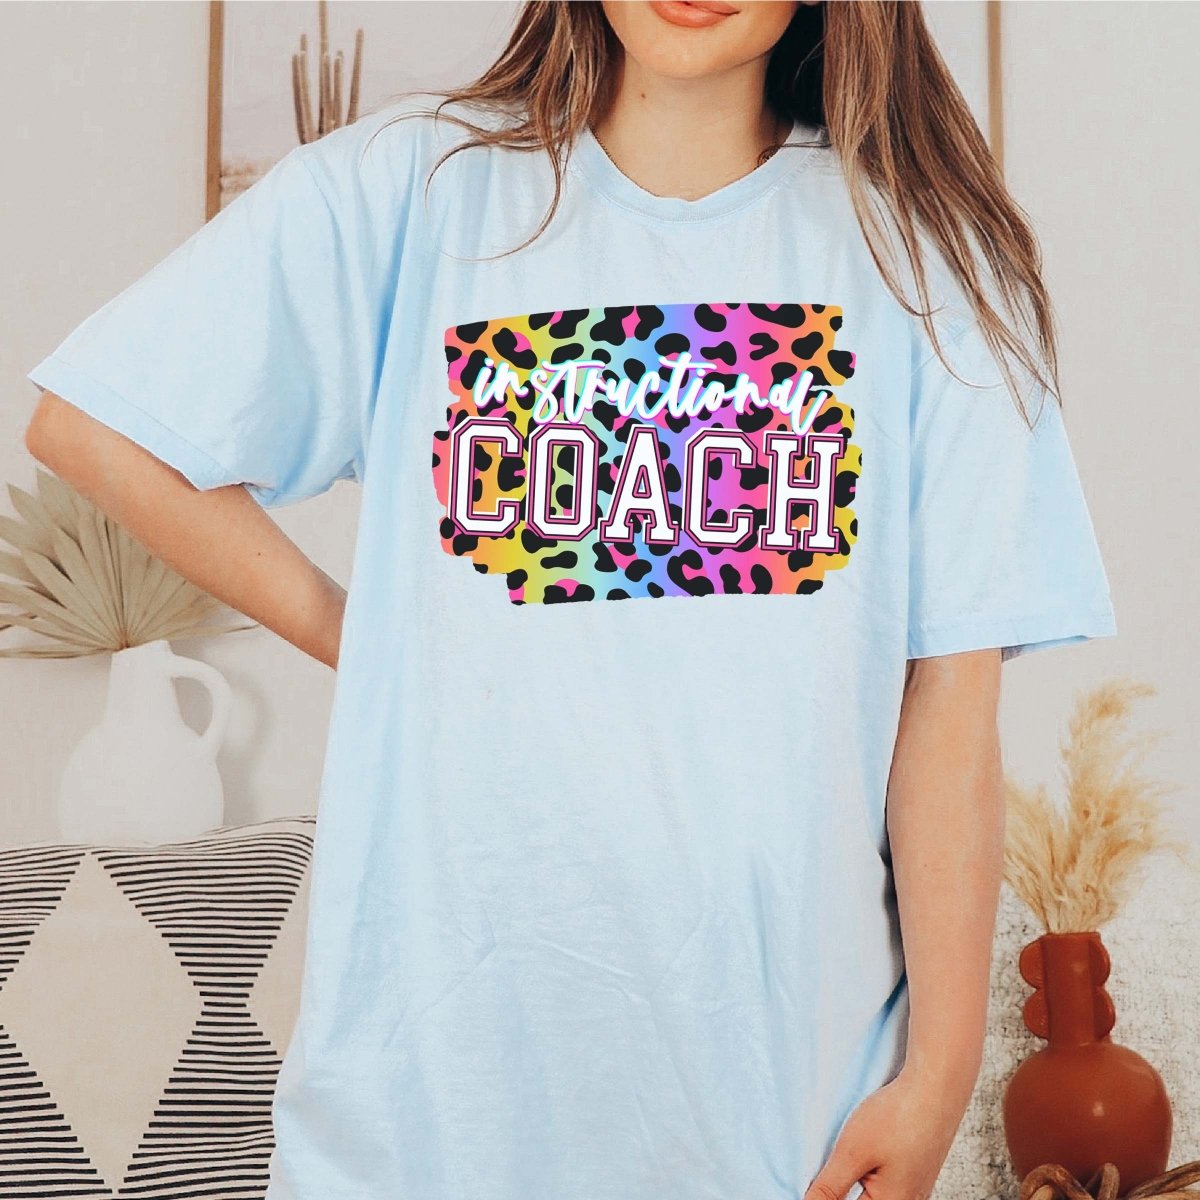 Instructional Coach 90's Tee - Limeberry Designs